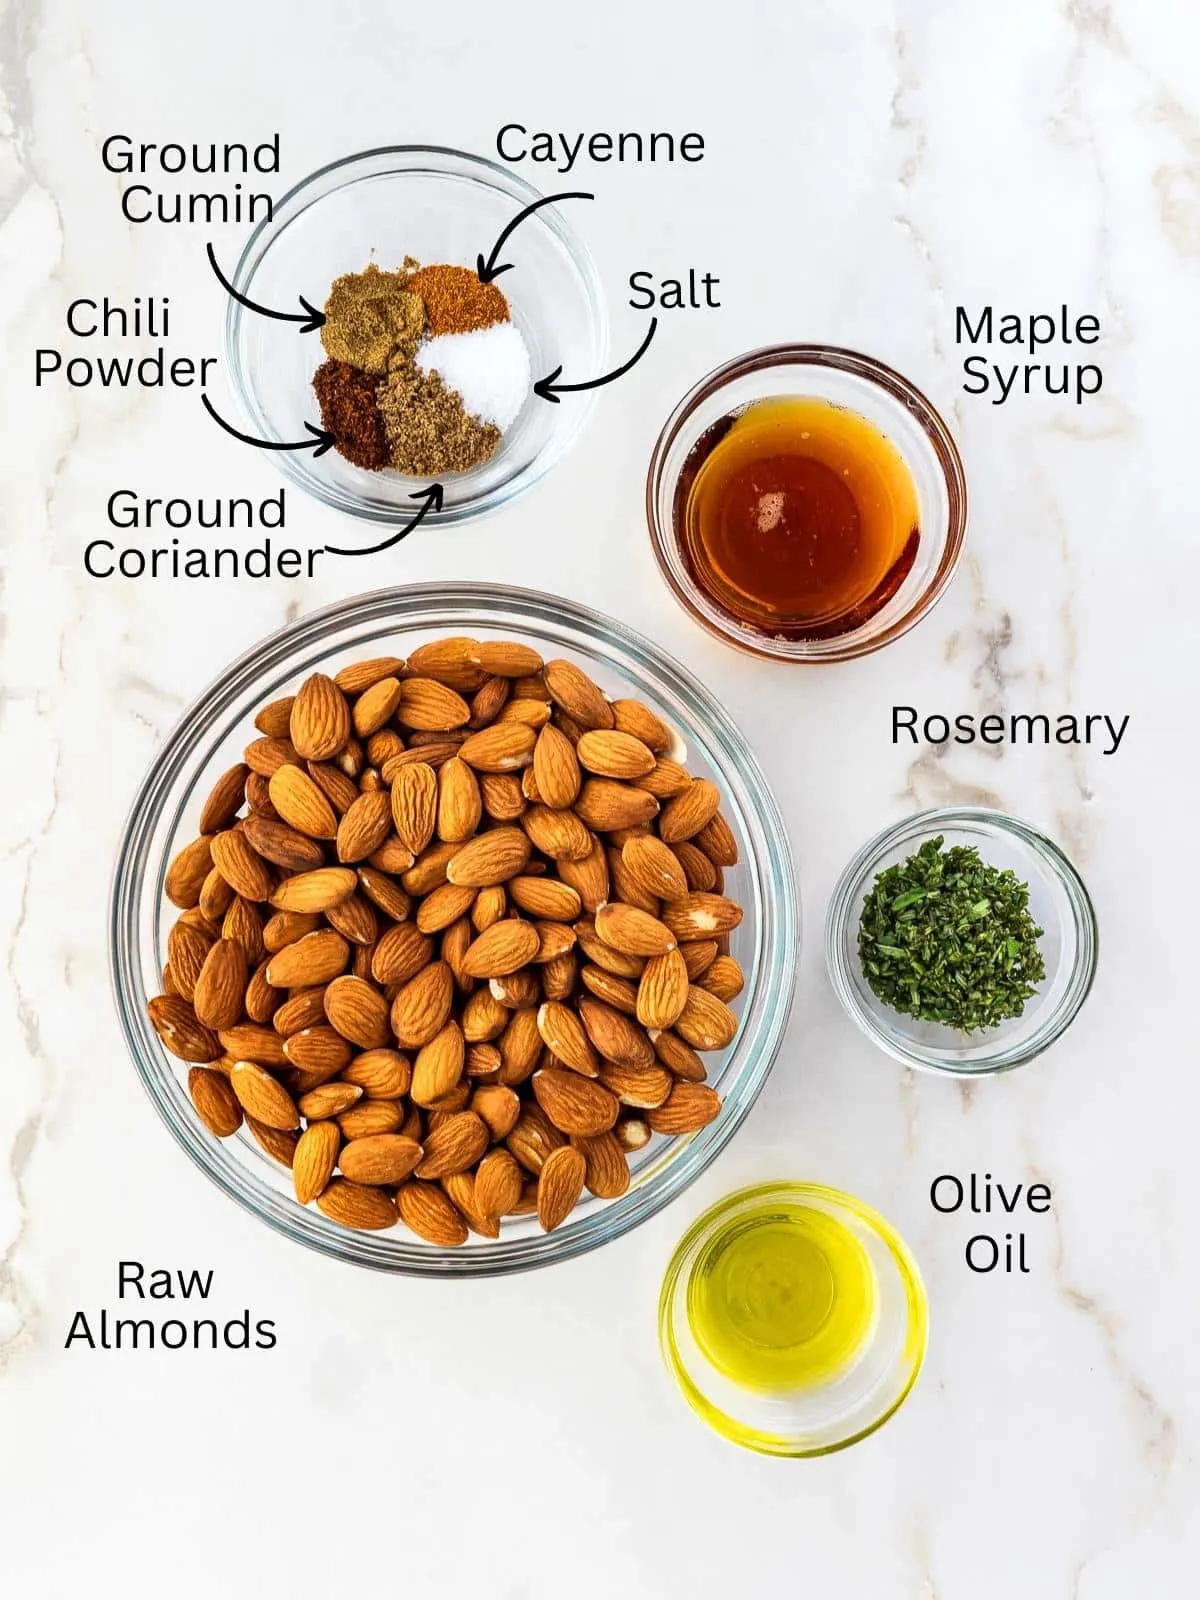 Image of ingredients needed to make rosemary roasted almonds.